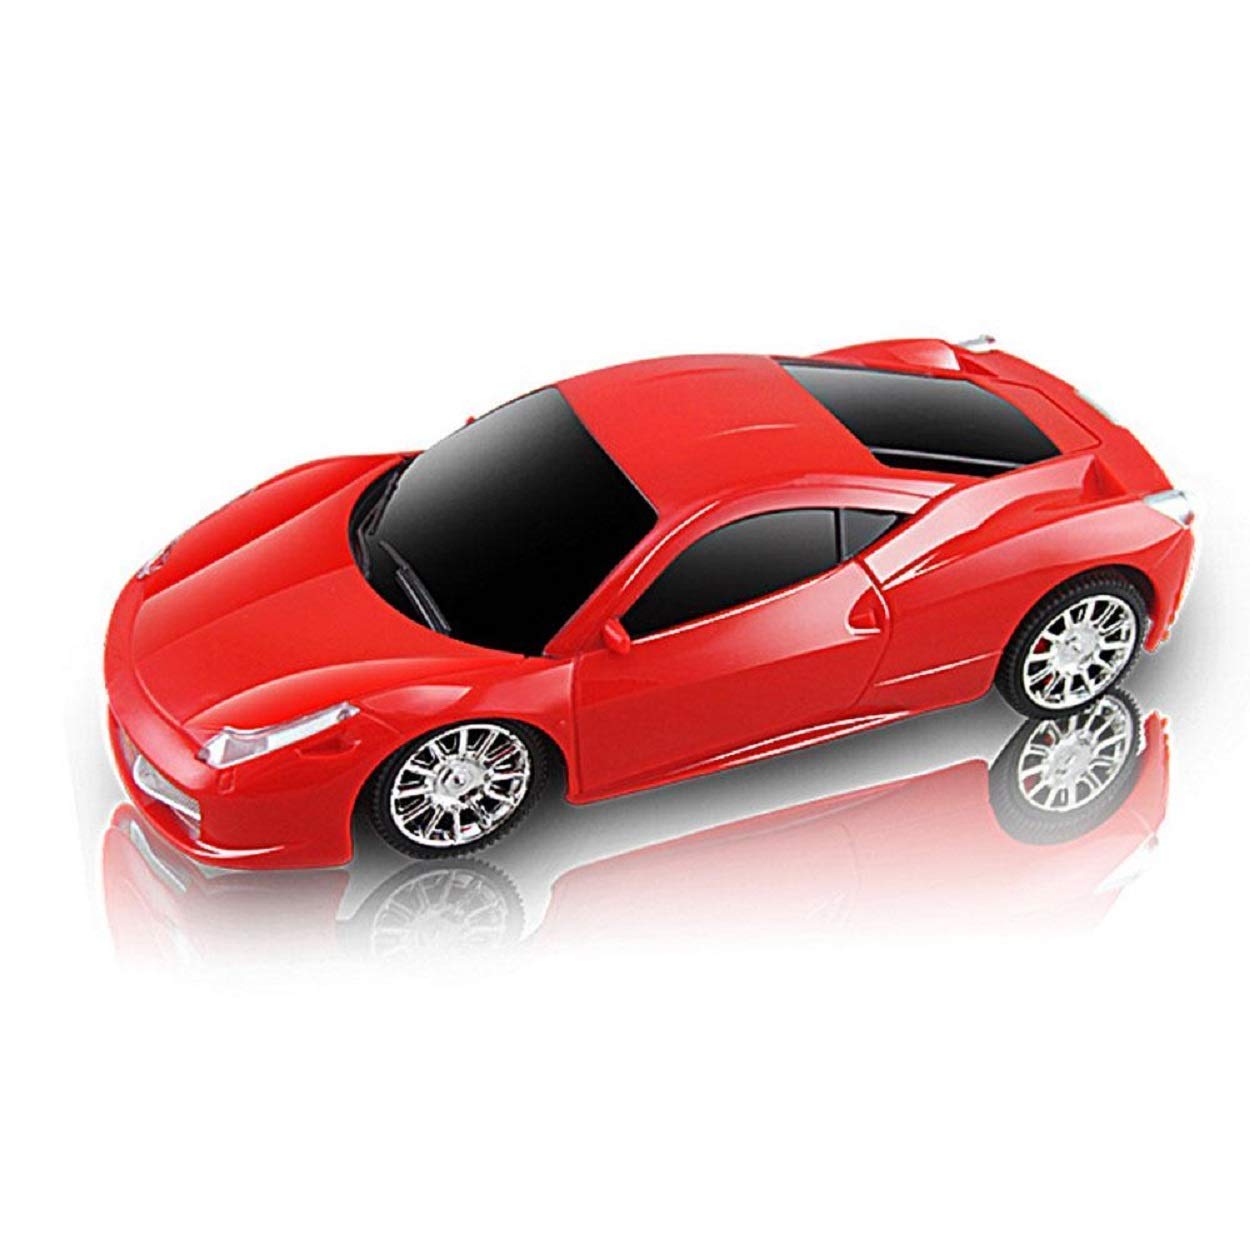 Customs clearance of car toy